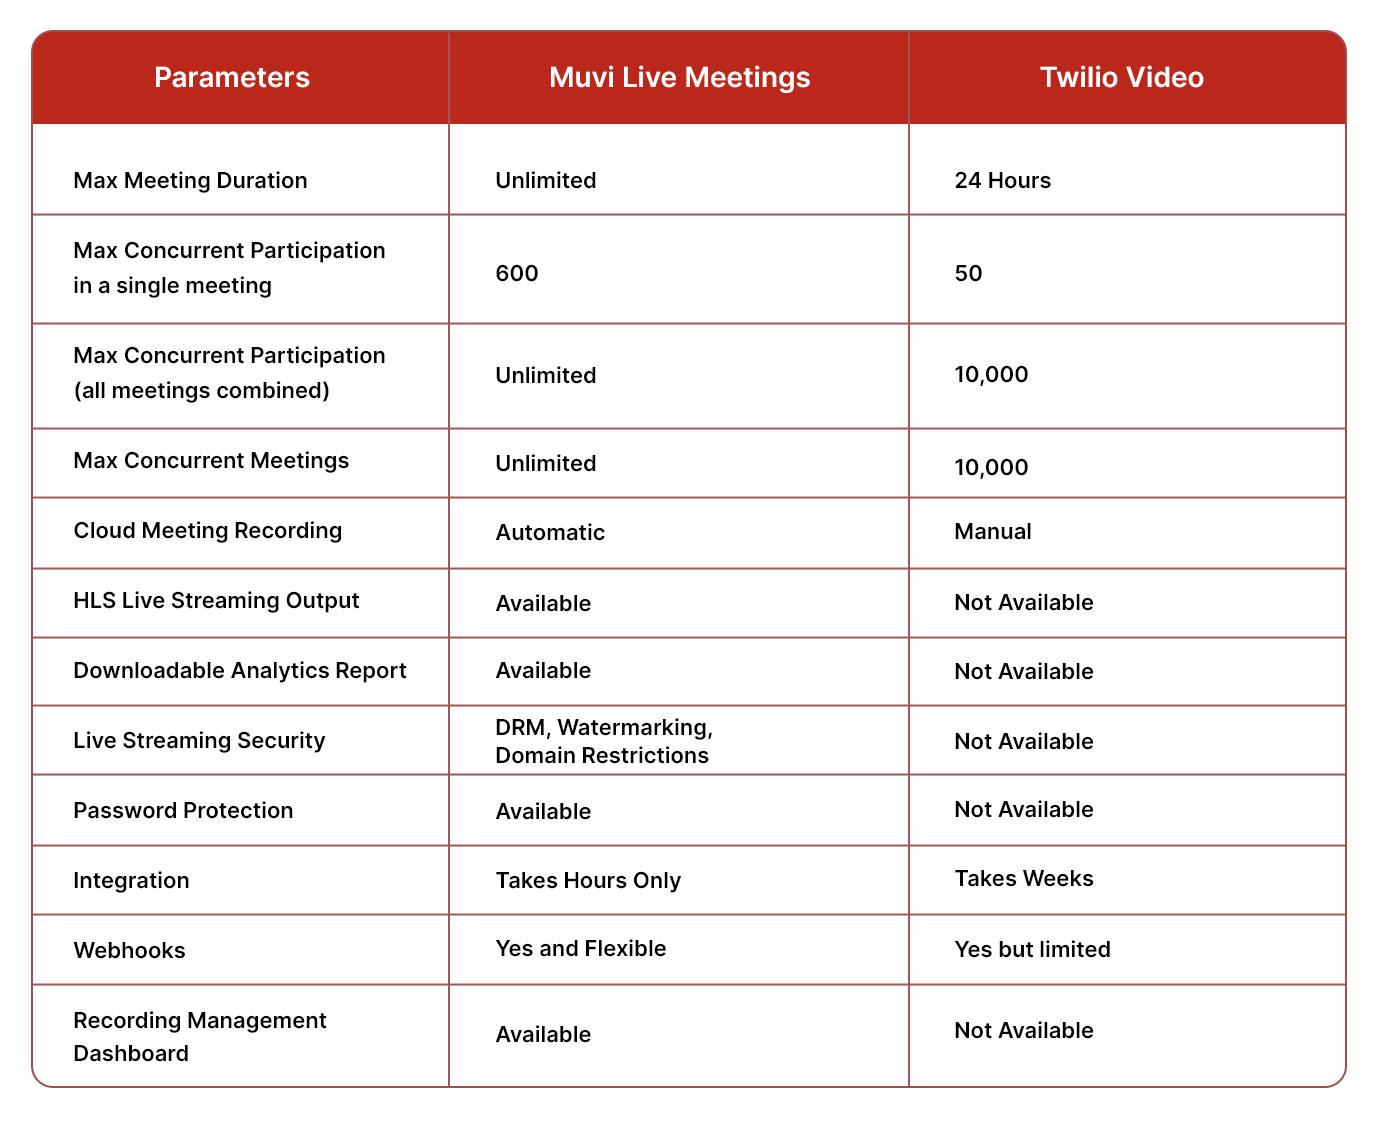 A table showing how Muvi Live Meetings is actually better than Twilio Video. A comparison between Muvi live and Twilio